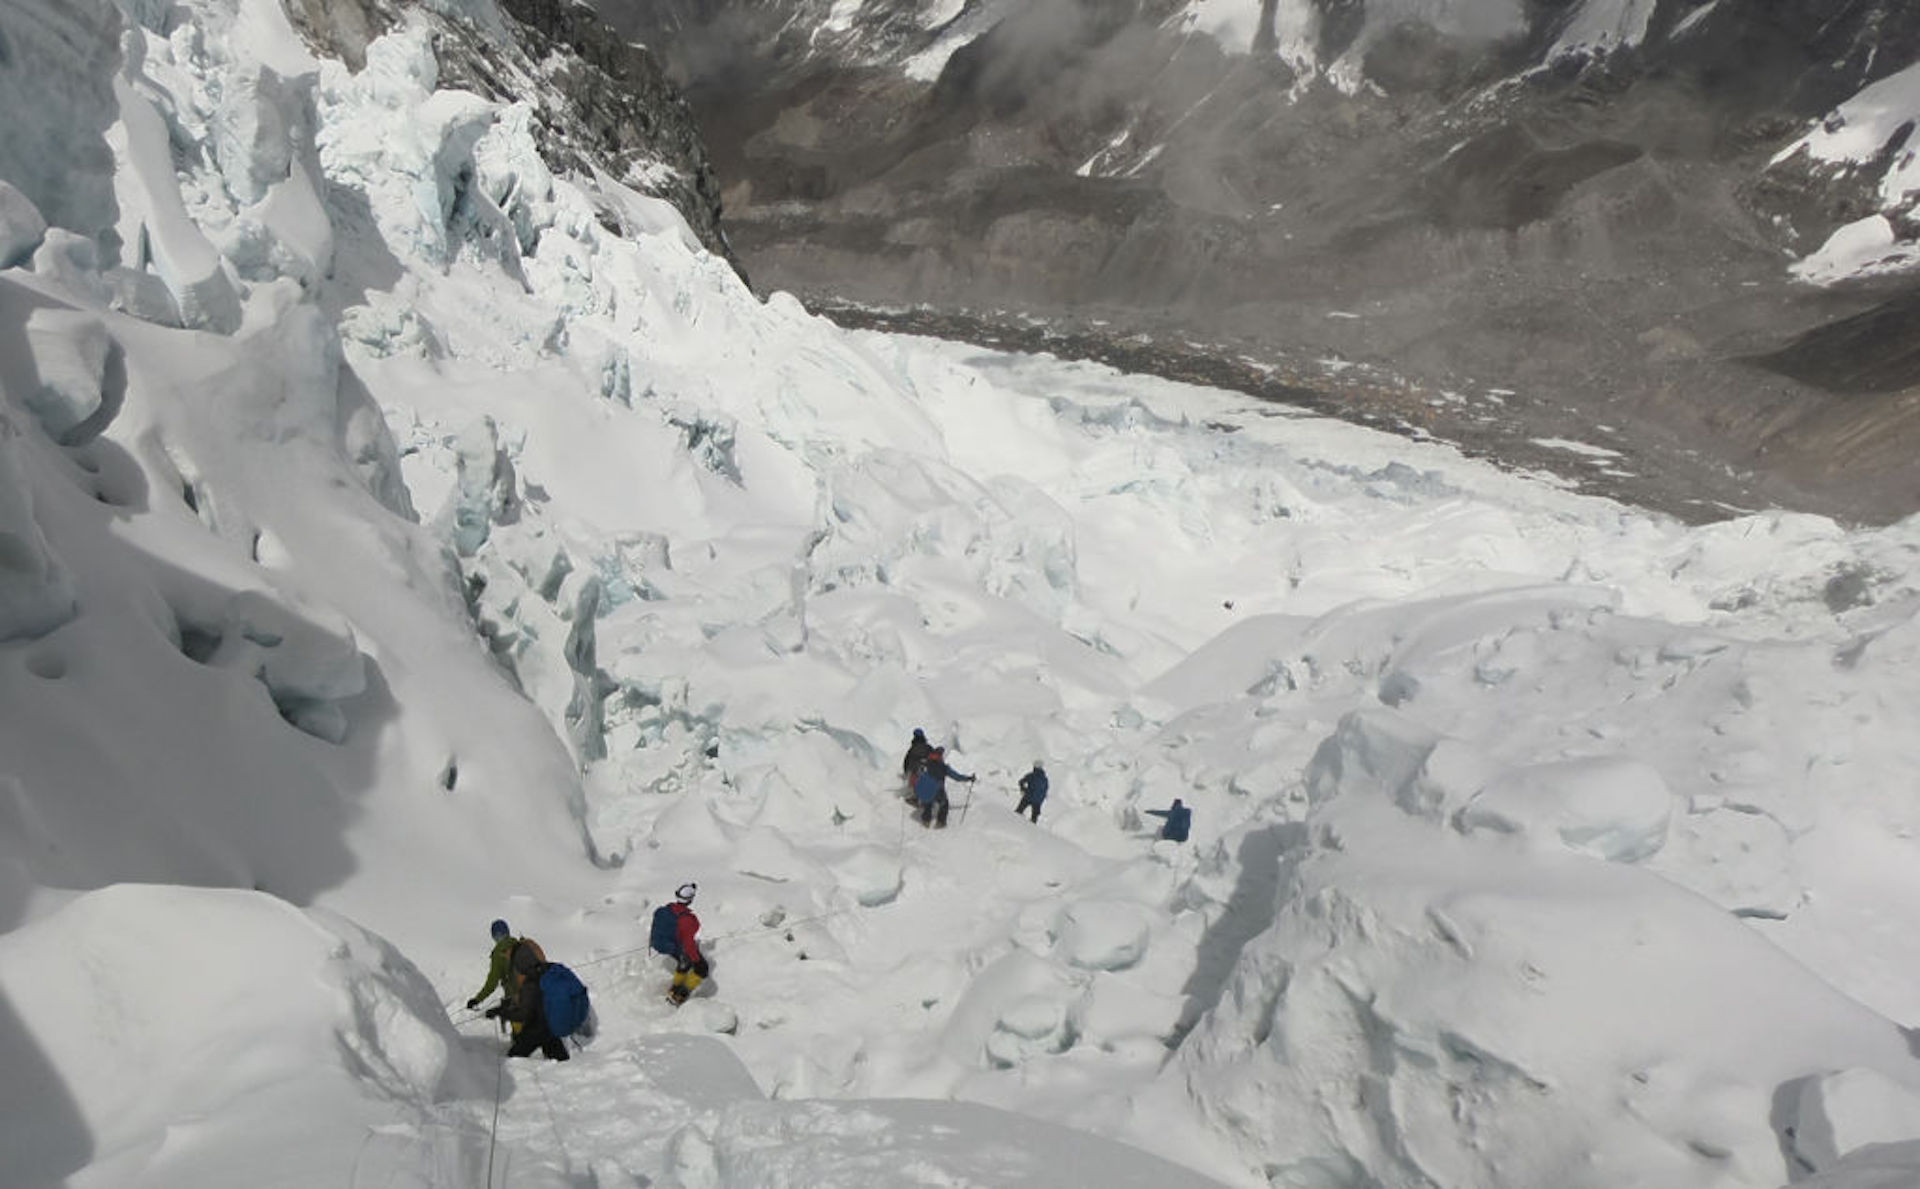 Mountaineers prepare to ascend the south face of Everest from Nepal. Guides are crucial to these expeditions and do most of the dangerous legwork. GETTY IMAGES